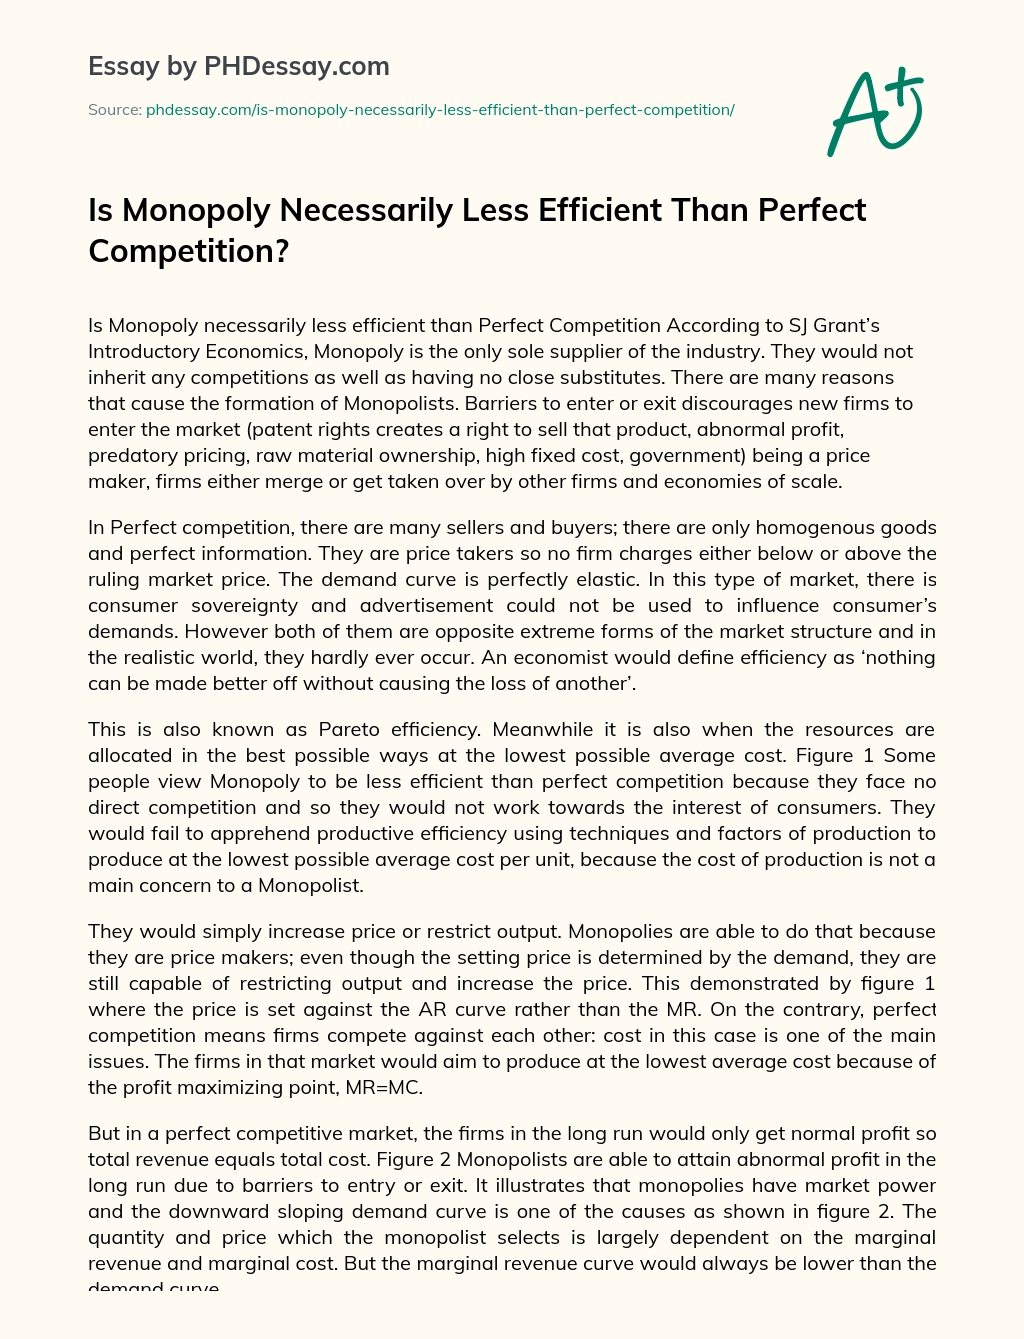 Is Monopoly Necessarily Less Efficient Than Perfect Competition? essay